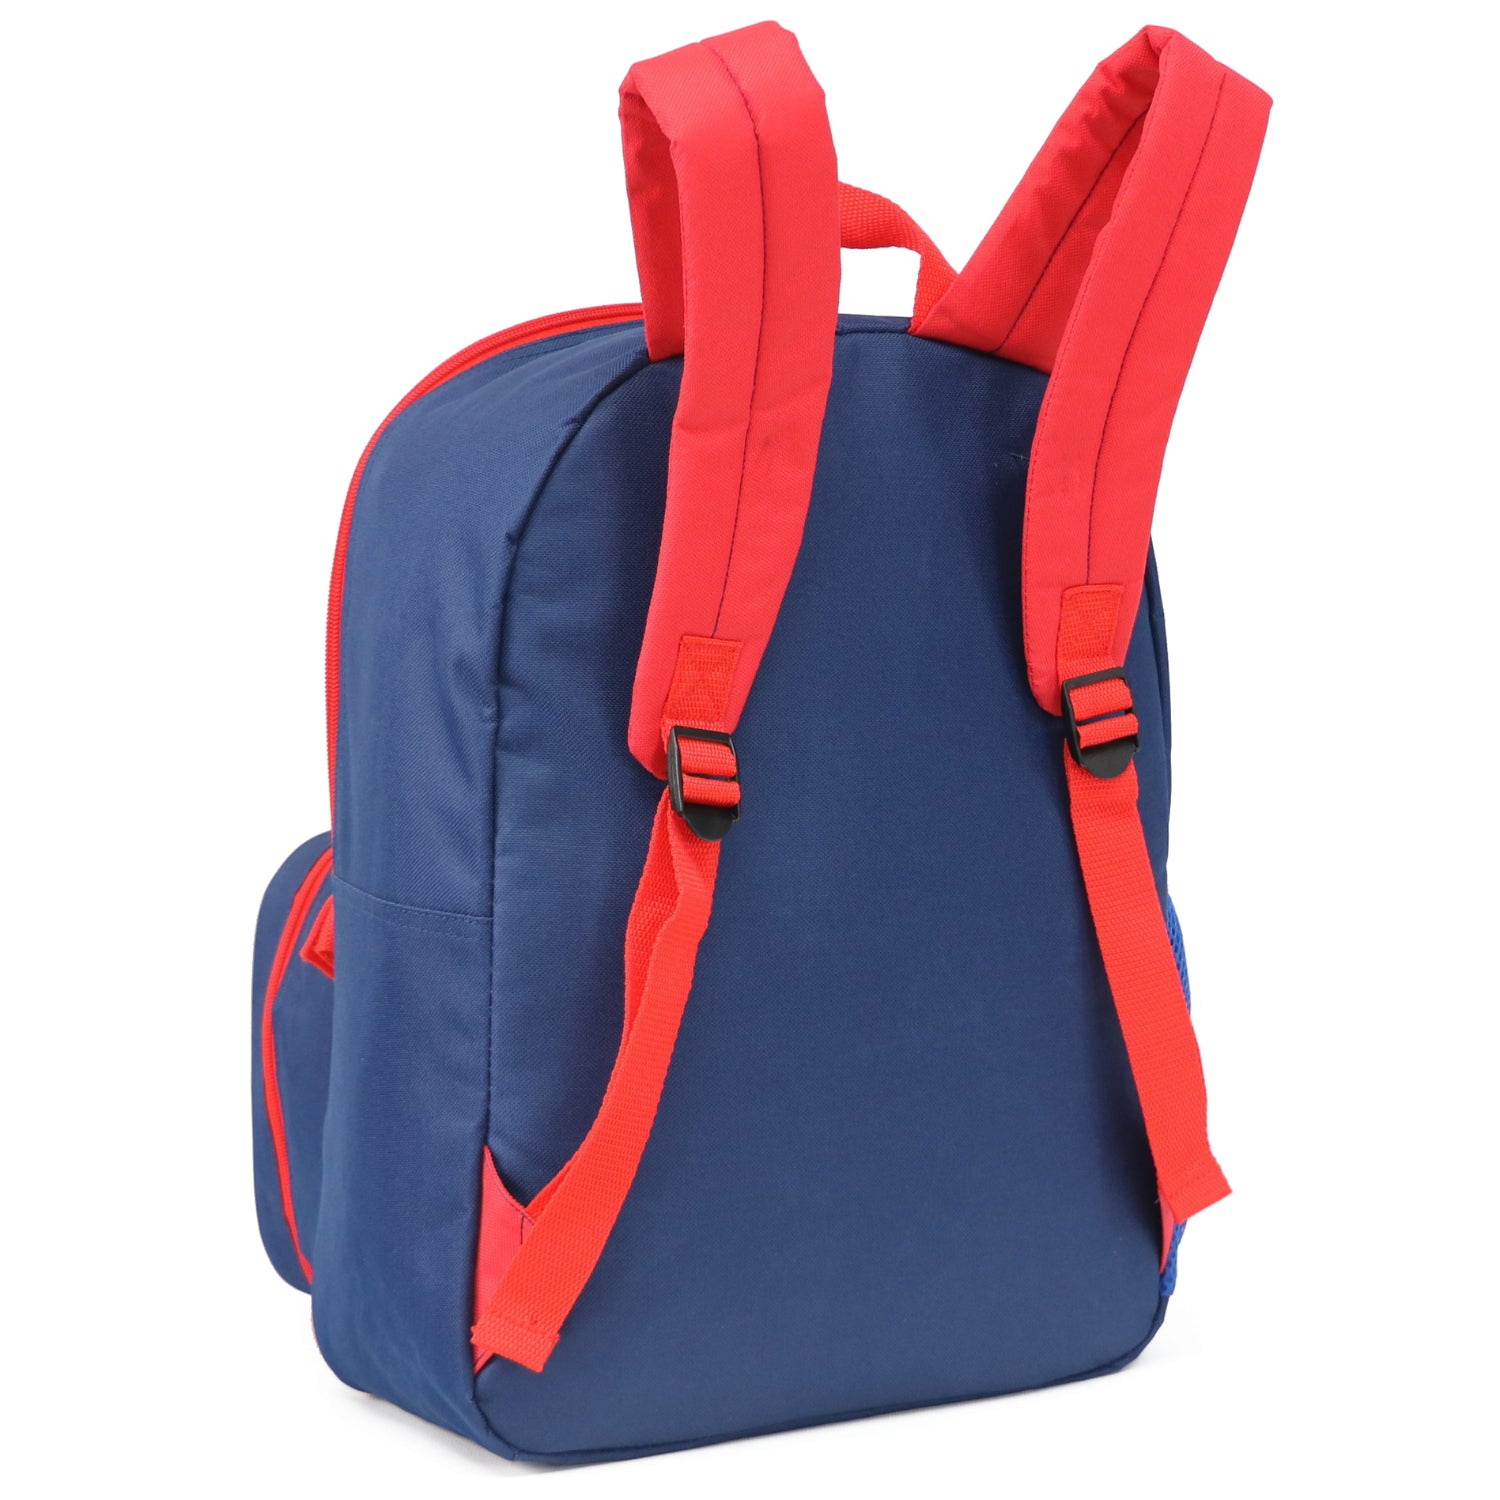 Heys Transformers Deluxe Backpack and Lunch Bag Set